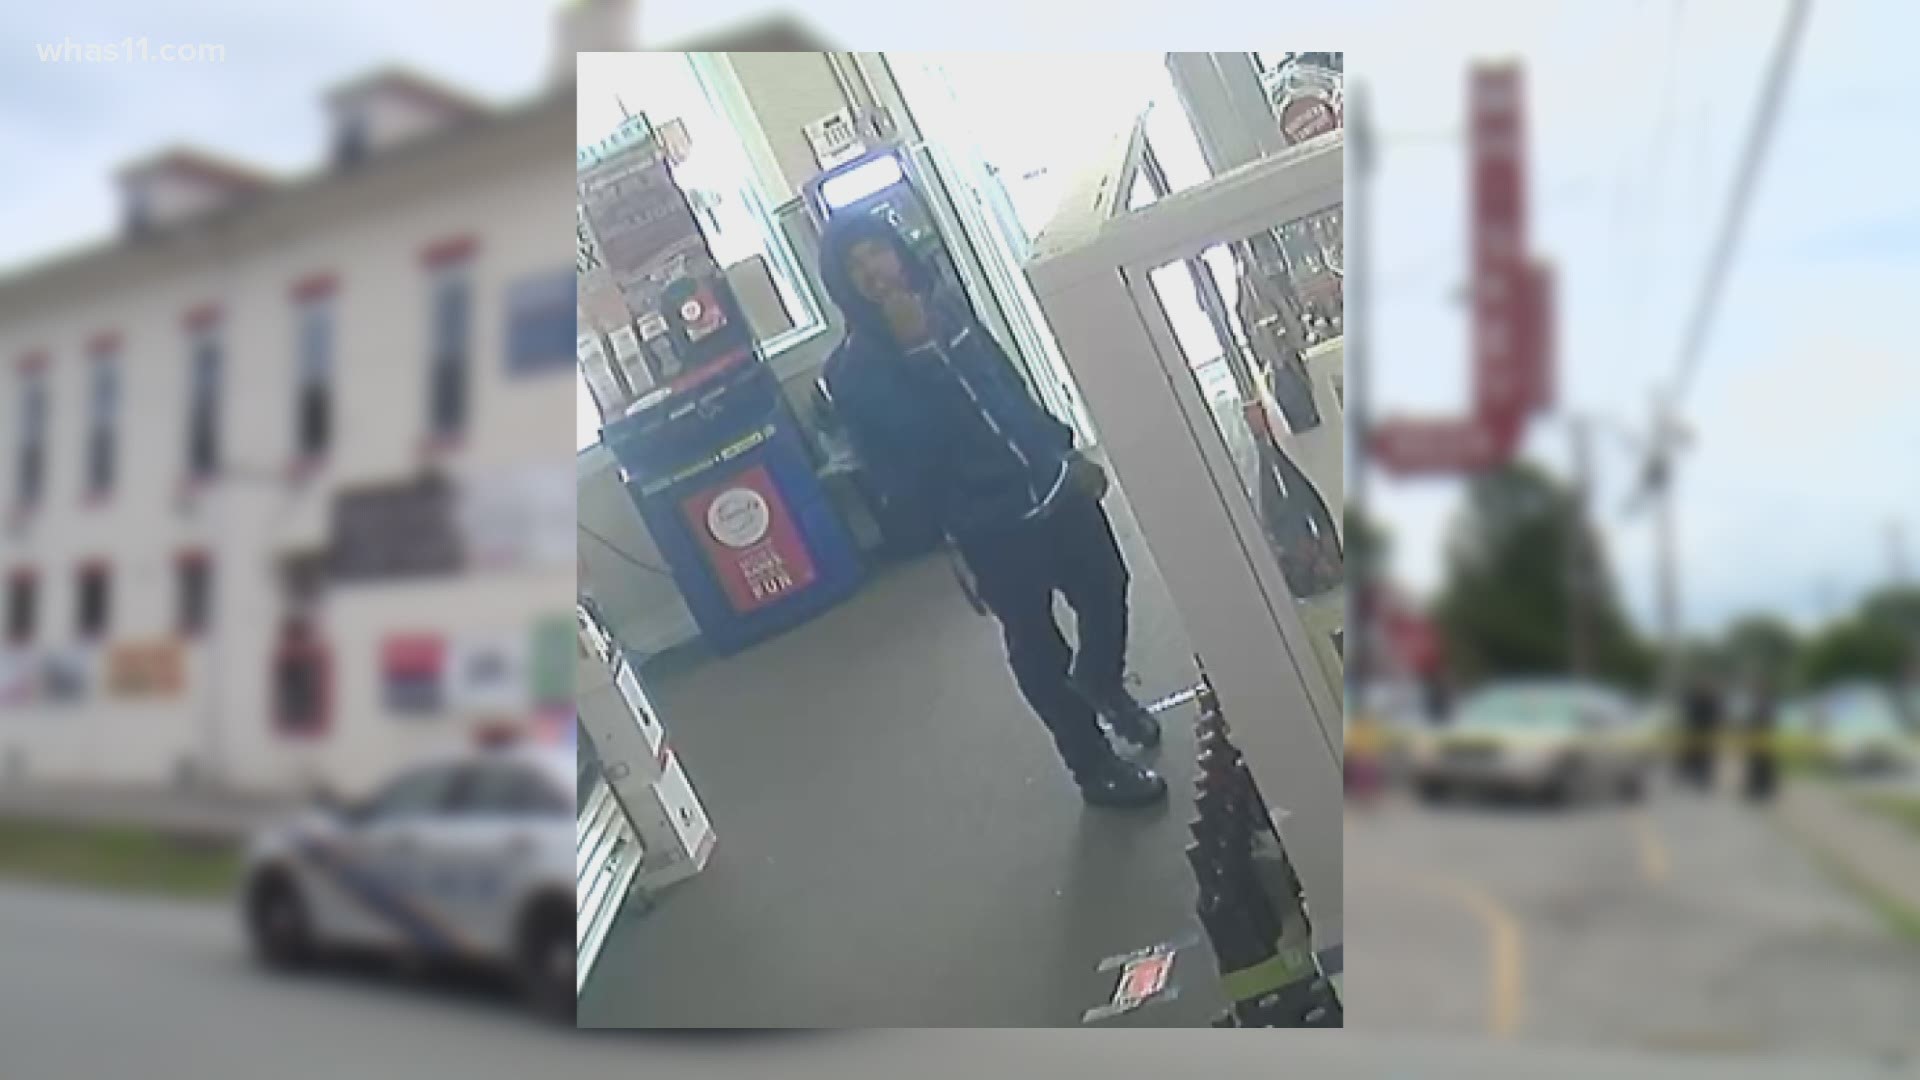 The Louisville Metro Police Department (LMPD) released surveillance images of a person suspected in a deadly shooting at a liquor store.